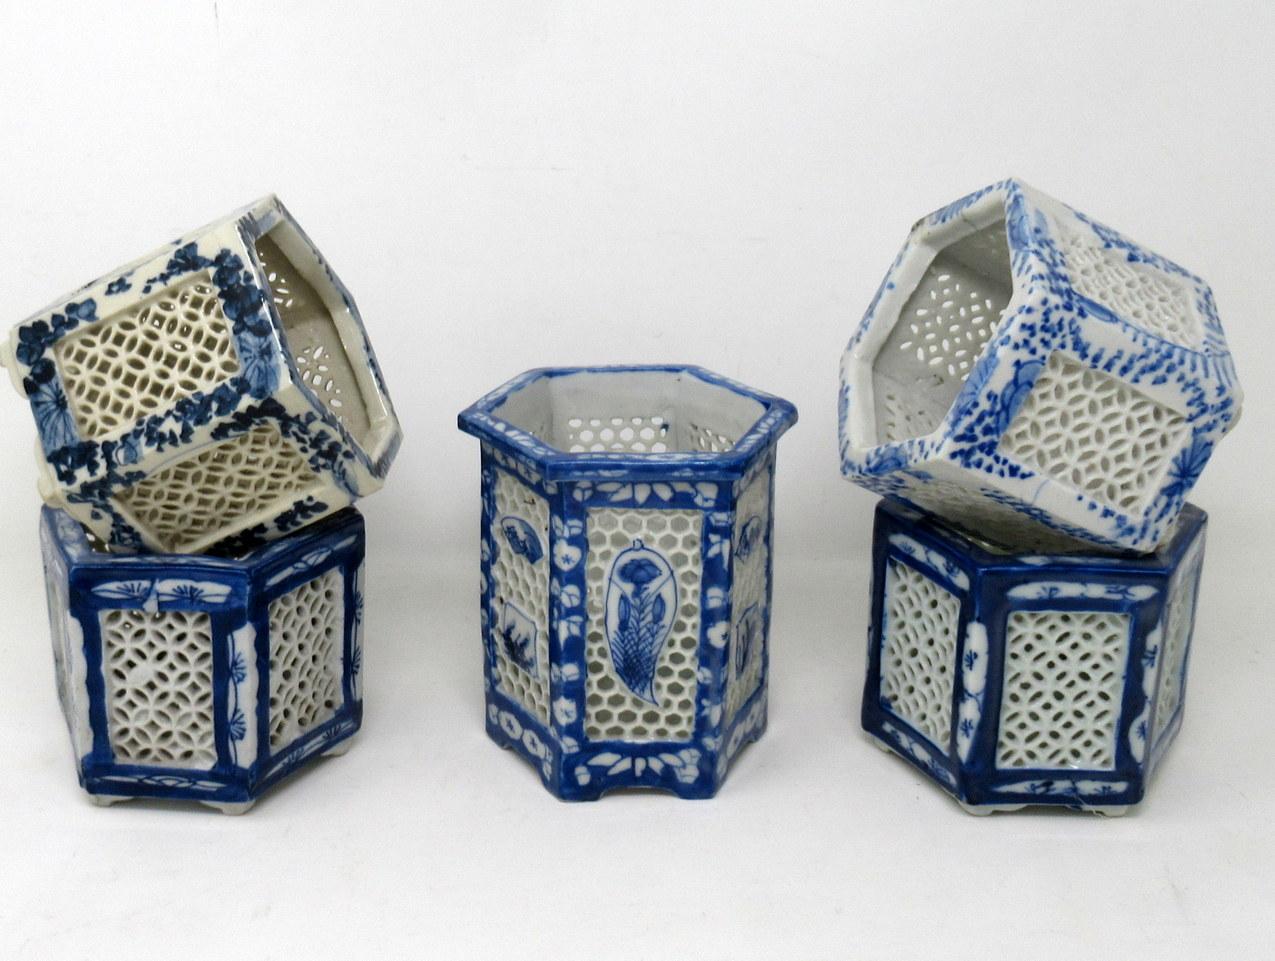 Stylish assembled set of five hand painted Chinese export reticulated pierced blue and white porcelain vases of hexagonal outline, sometimes referred to as cricket pots or cages. Circa first half of the twentieth century. 

Each finely hand